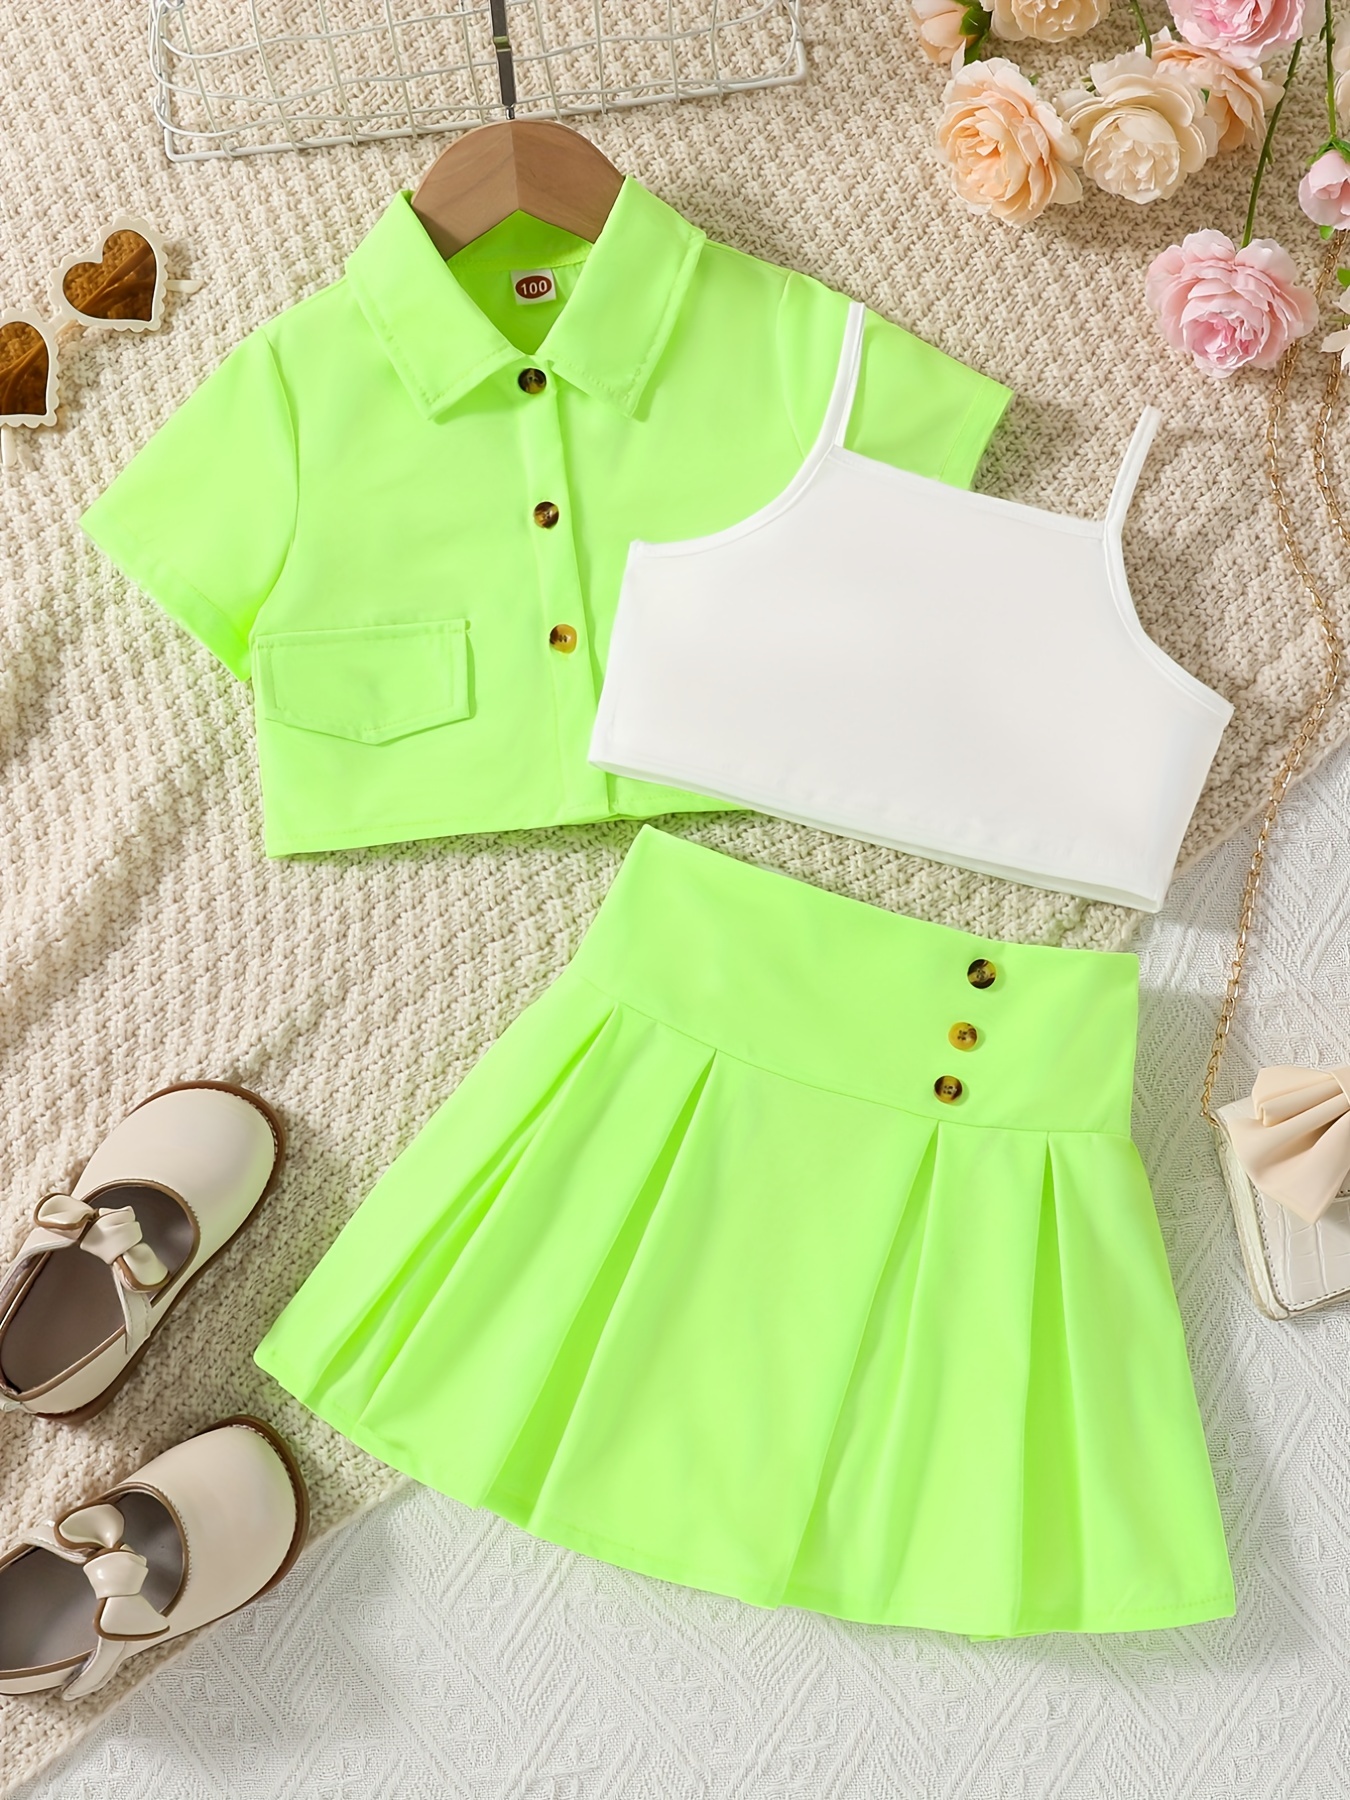 S9560, Children's and Girls' Dress, Top and Skirt